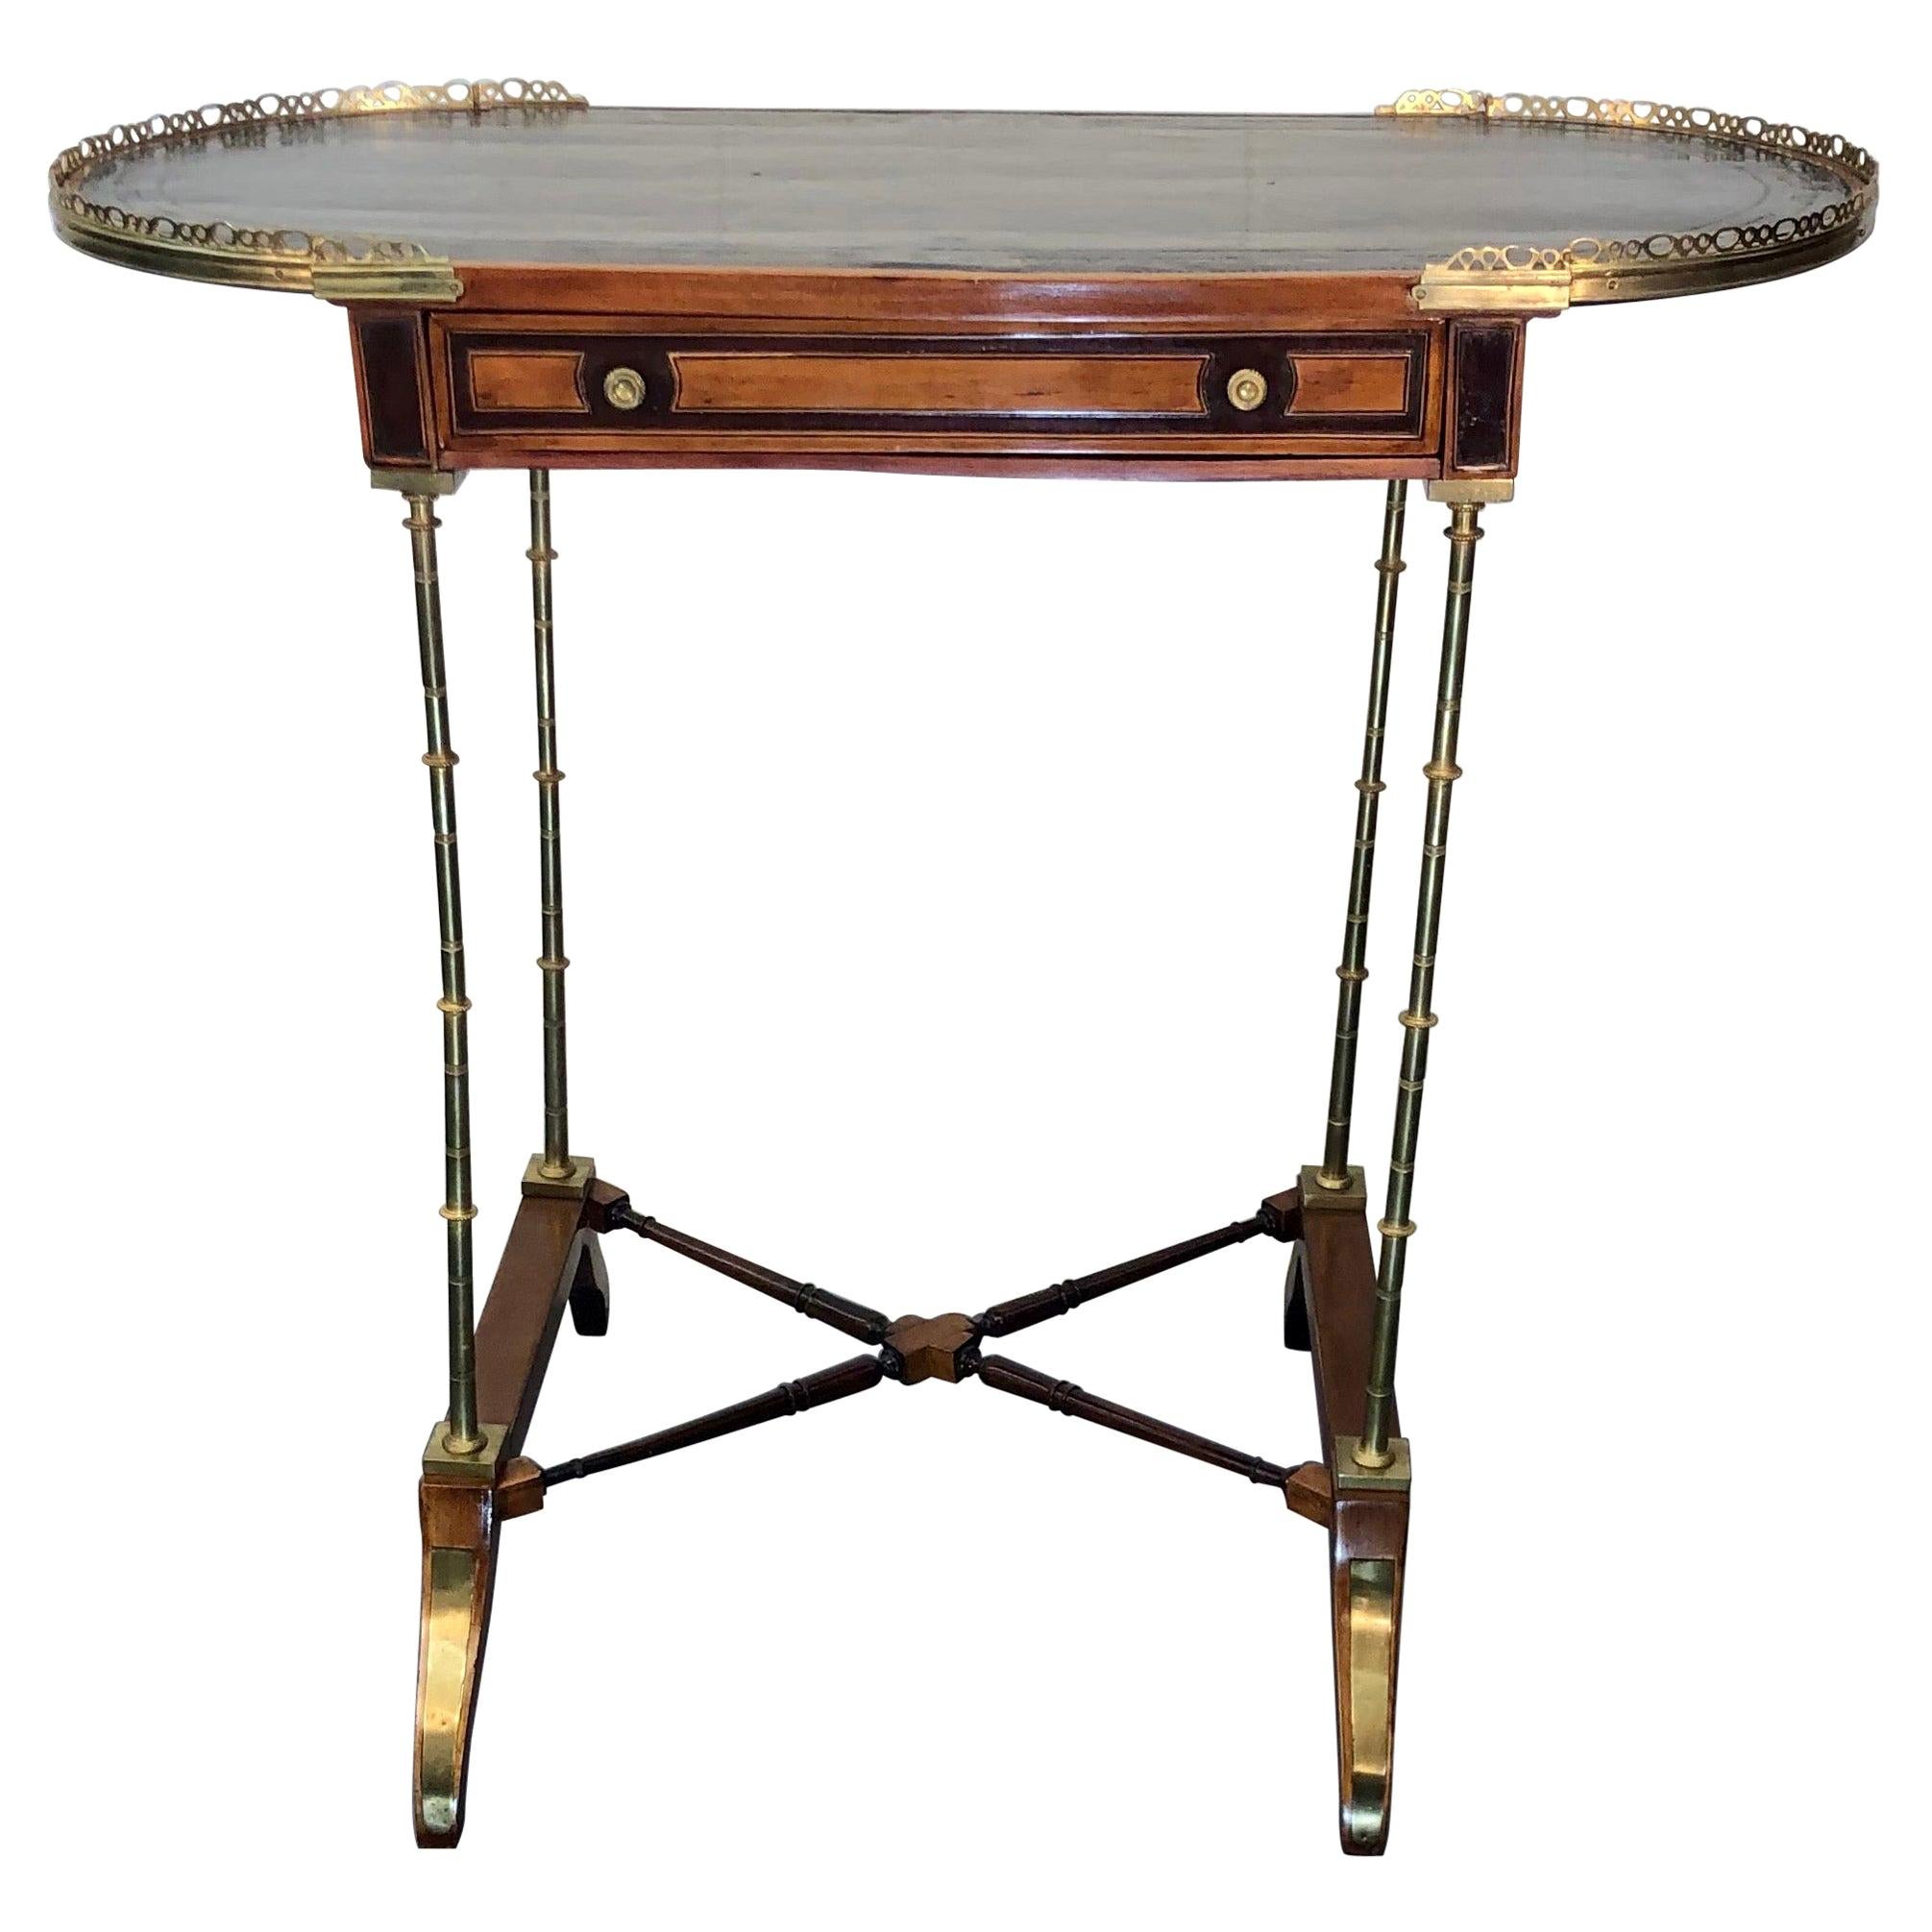 Signed Adam Weisweiler Neoclassical Table With Faux Bamboo Columns, 18th Century